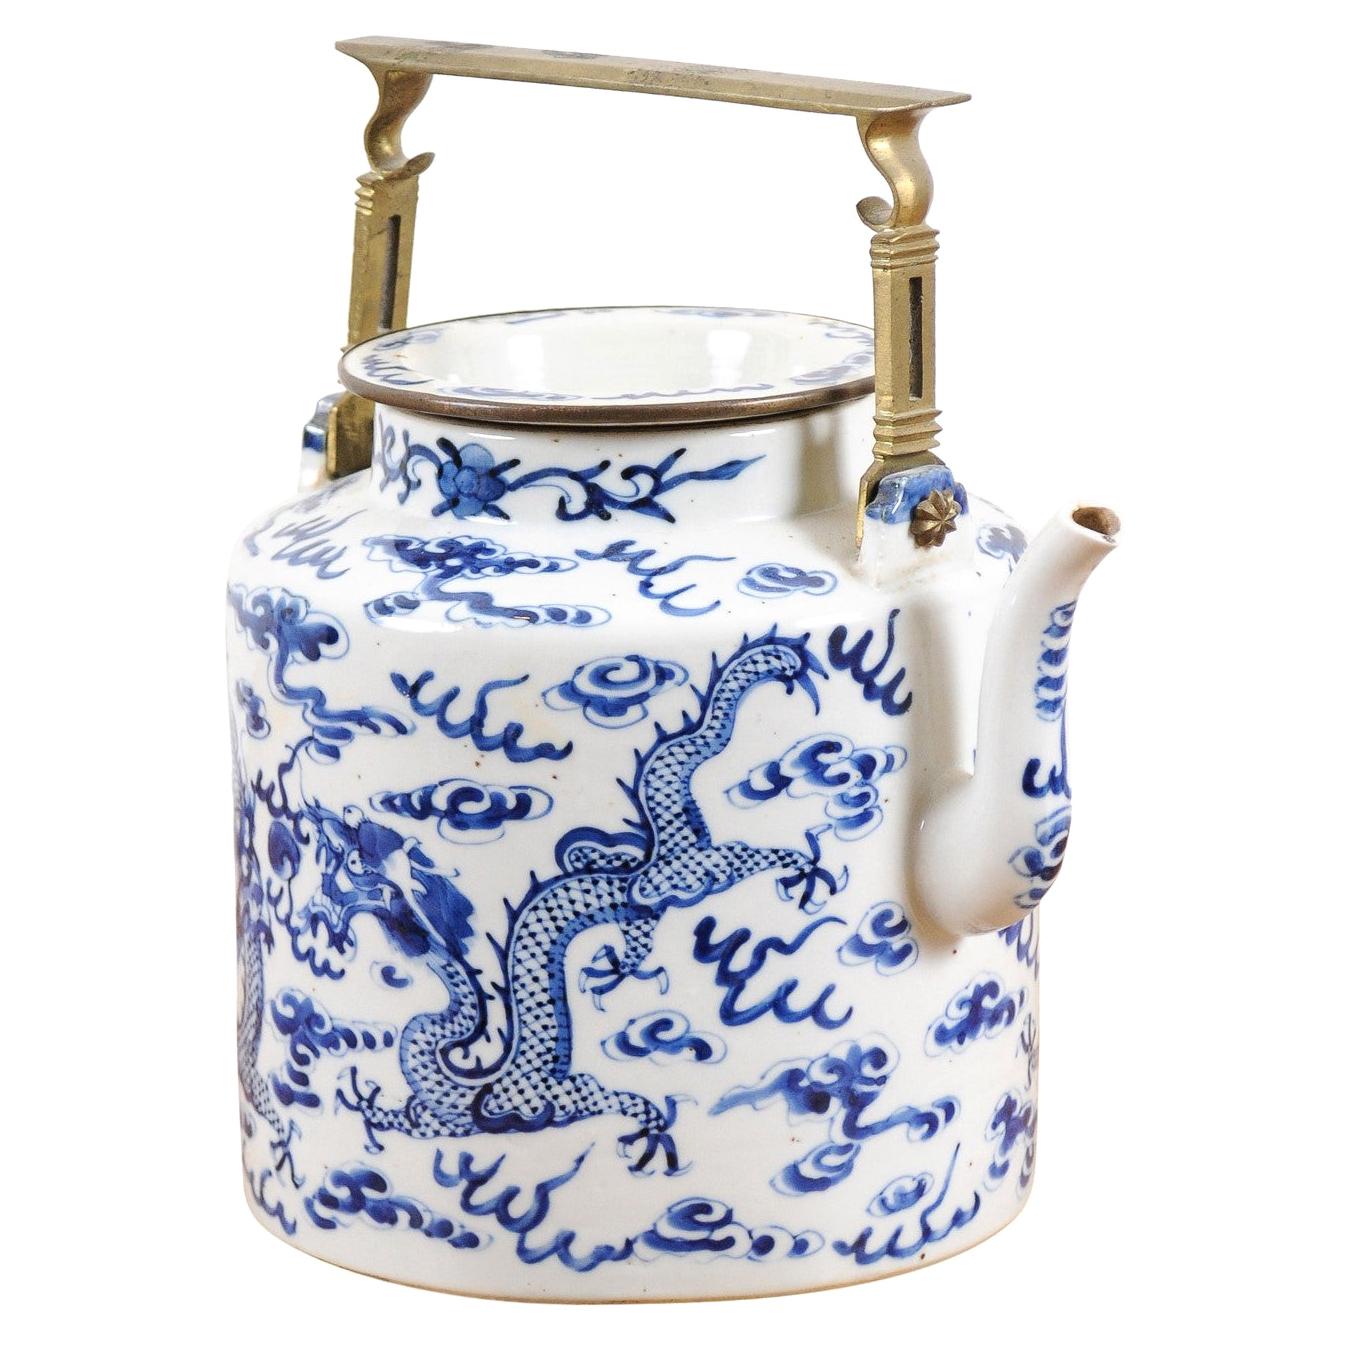 Chinese Export Early 20th Century Blue and White Porcelain Teapot with Dragons